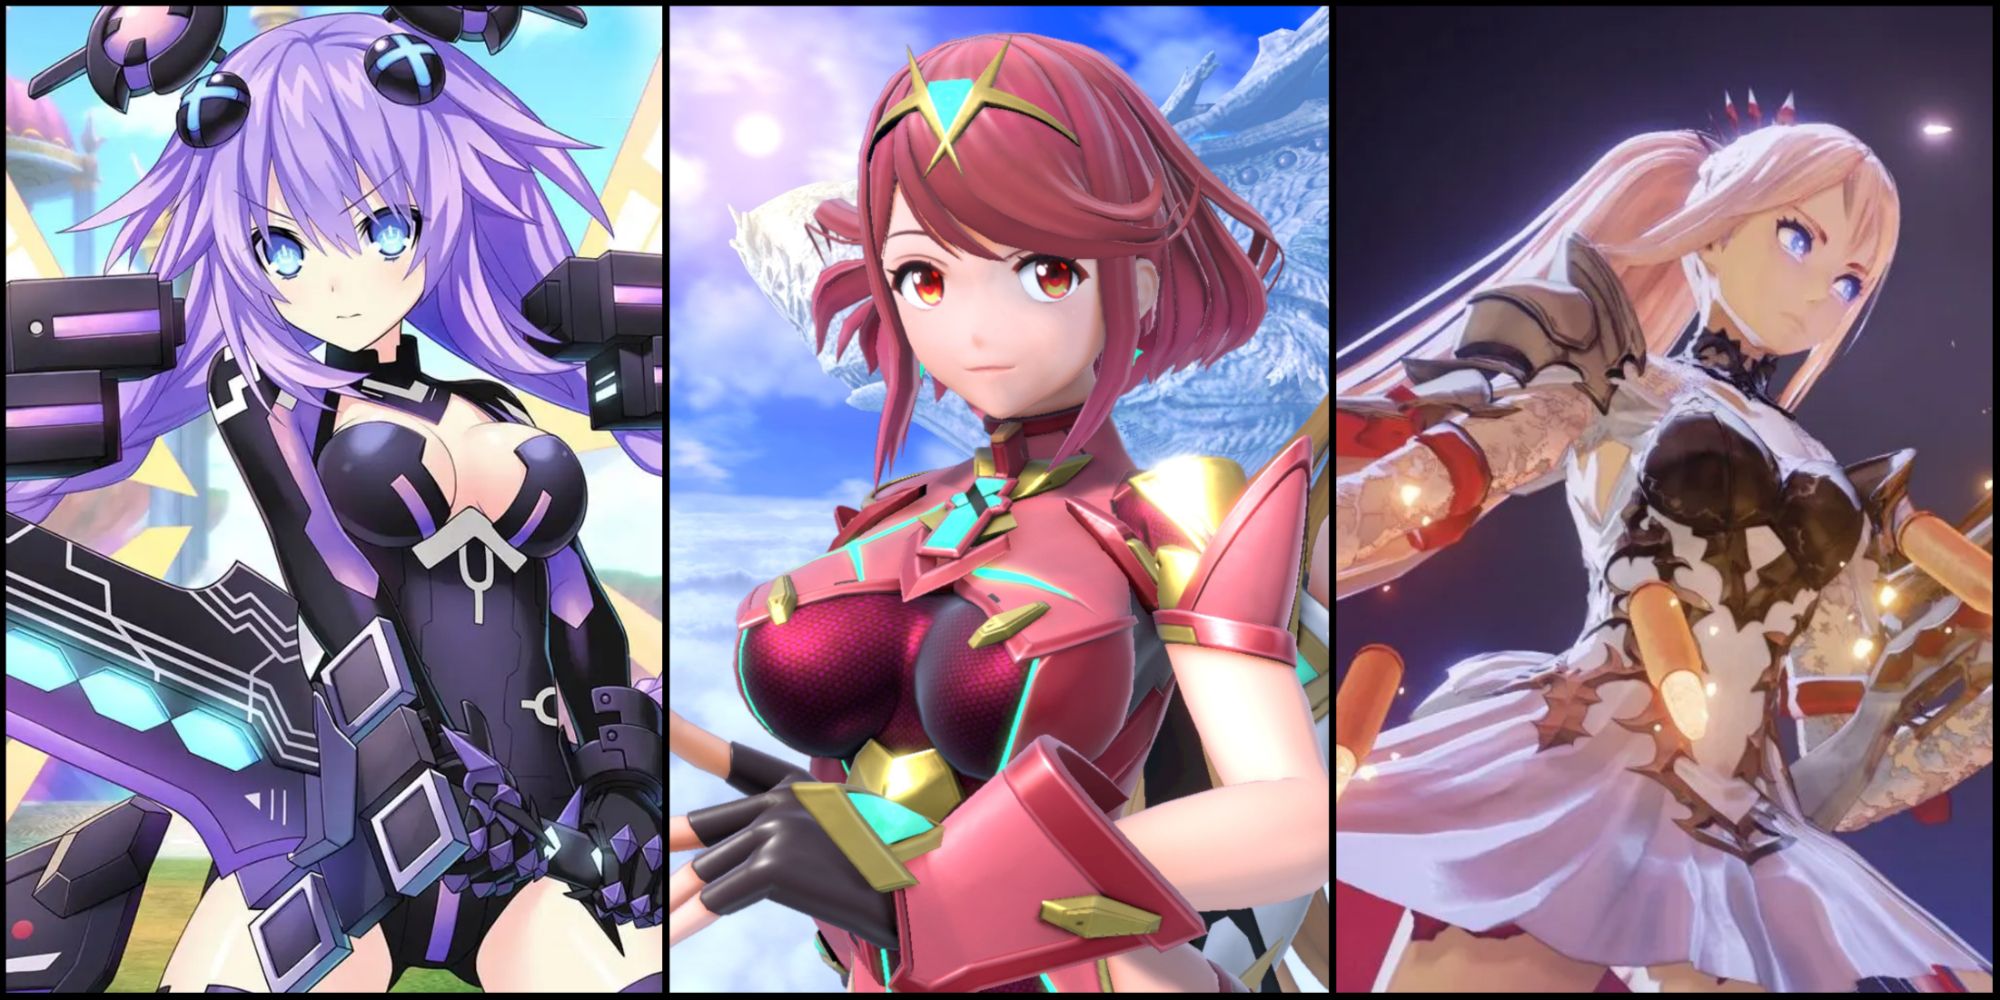 The List of Anime-Style Mobile Games Coming in August in China -- Superpixel